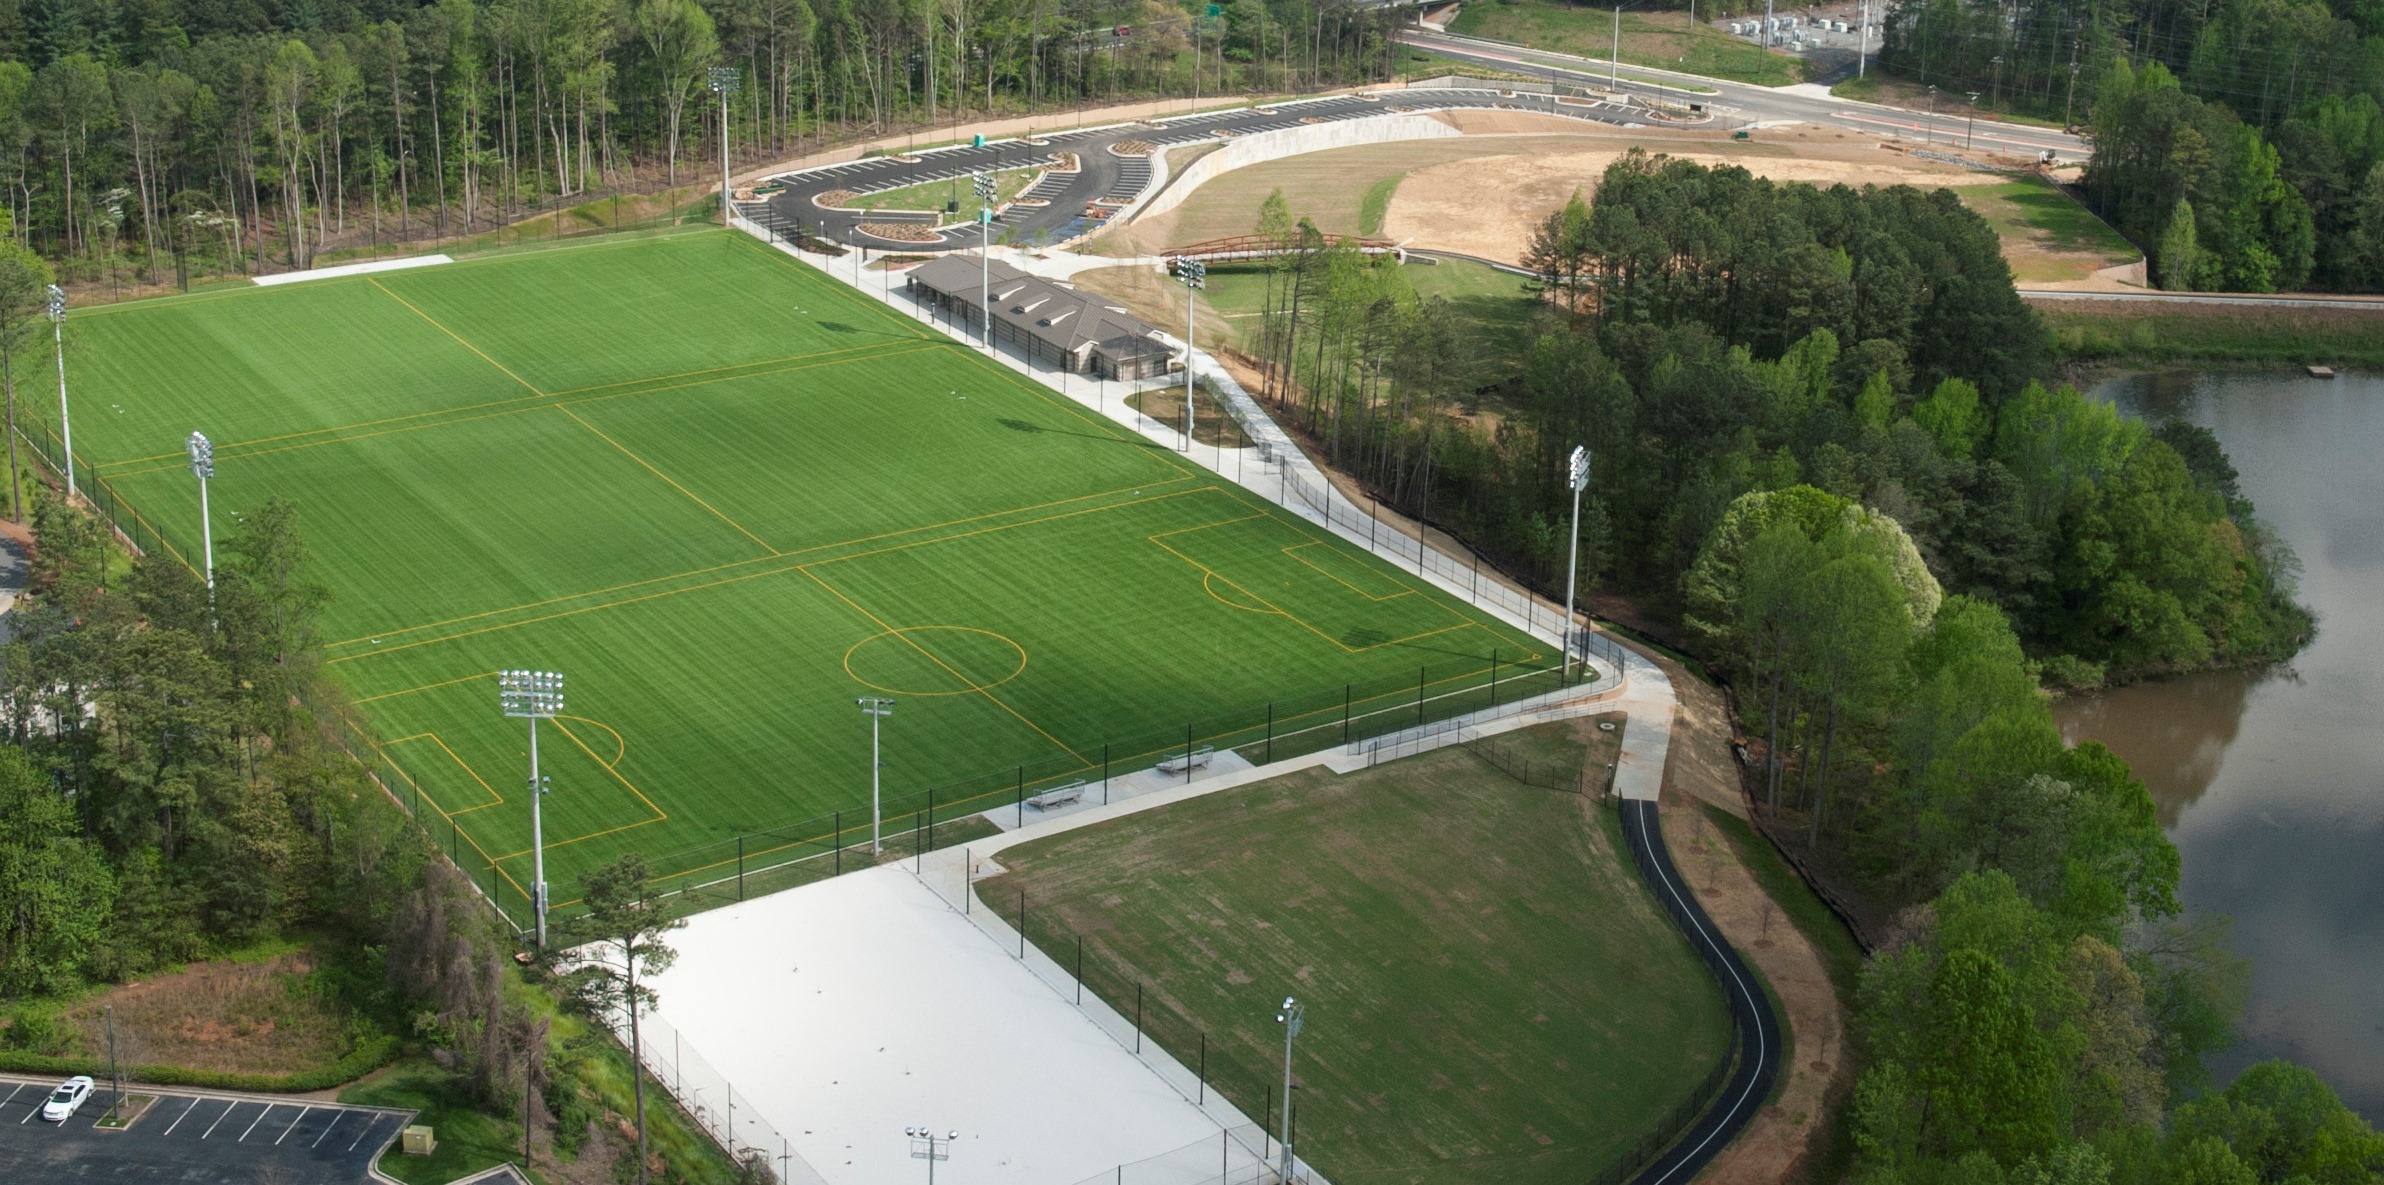 kennesaw-state-university-sports-complex-lose-design